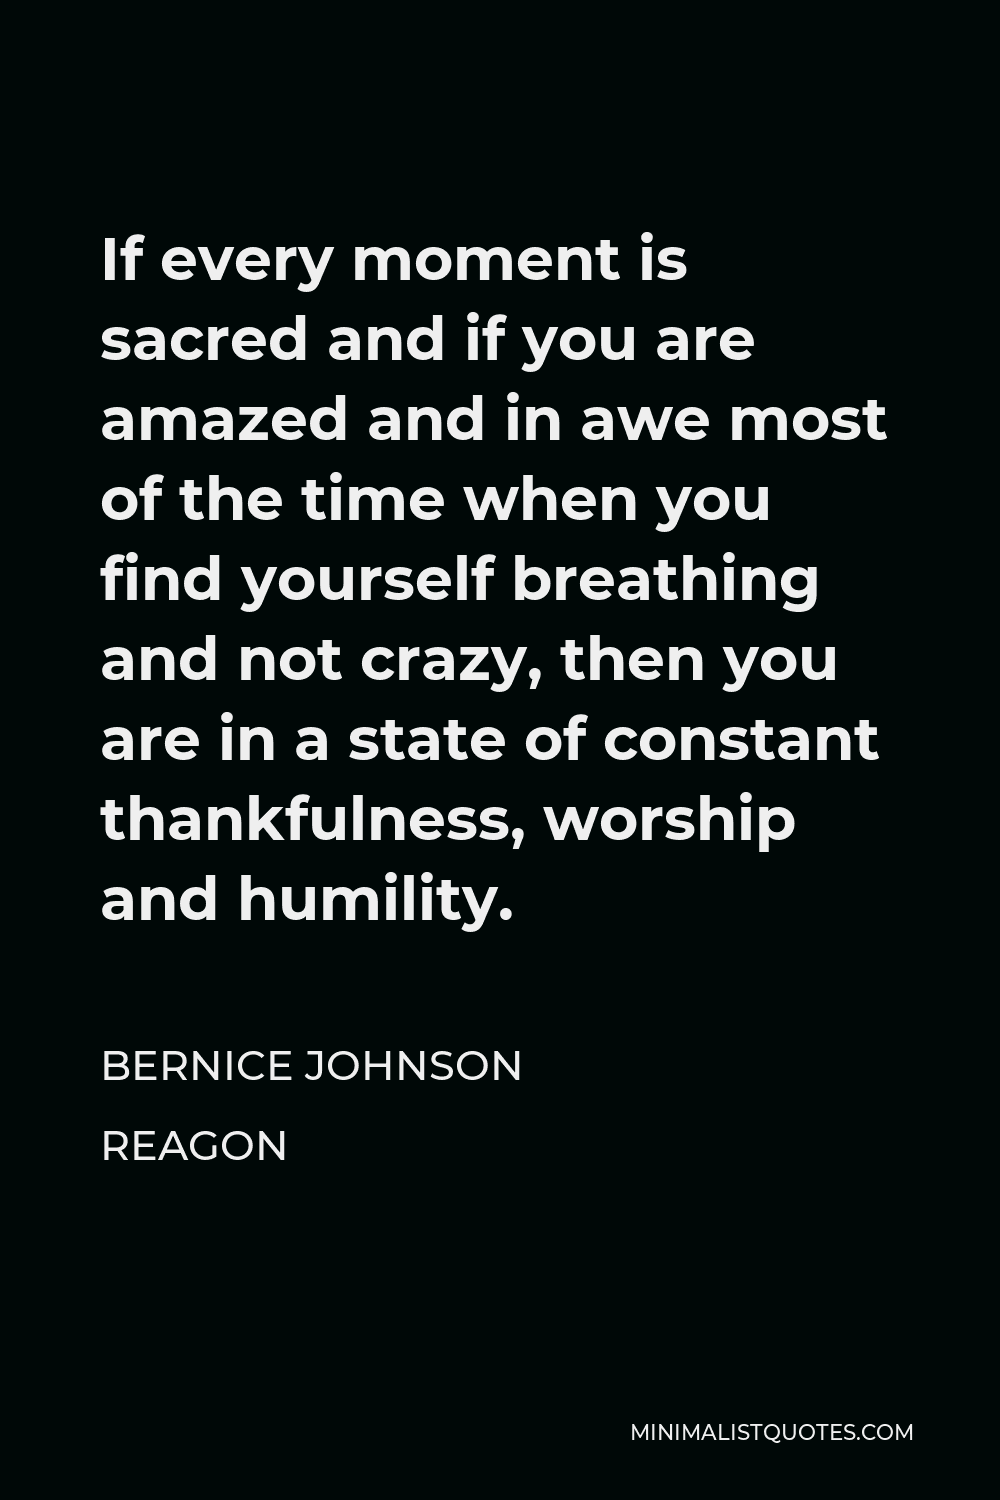 Bernice Johnson Reagon Quote - If every moment is sacred and if you are amazed and in awe most of the time when you find yourself breathing and not crazy, then you are in a state of constant thankfulness, worship and humility.